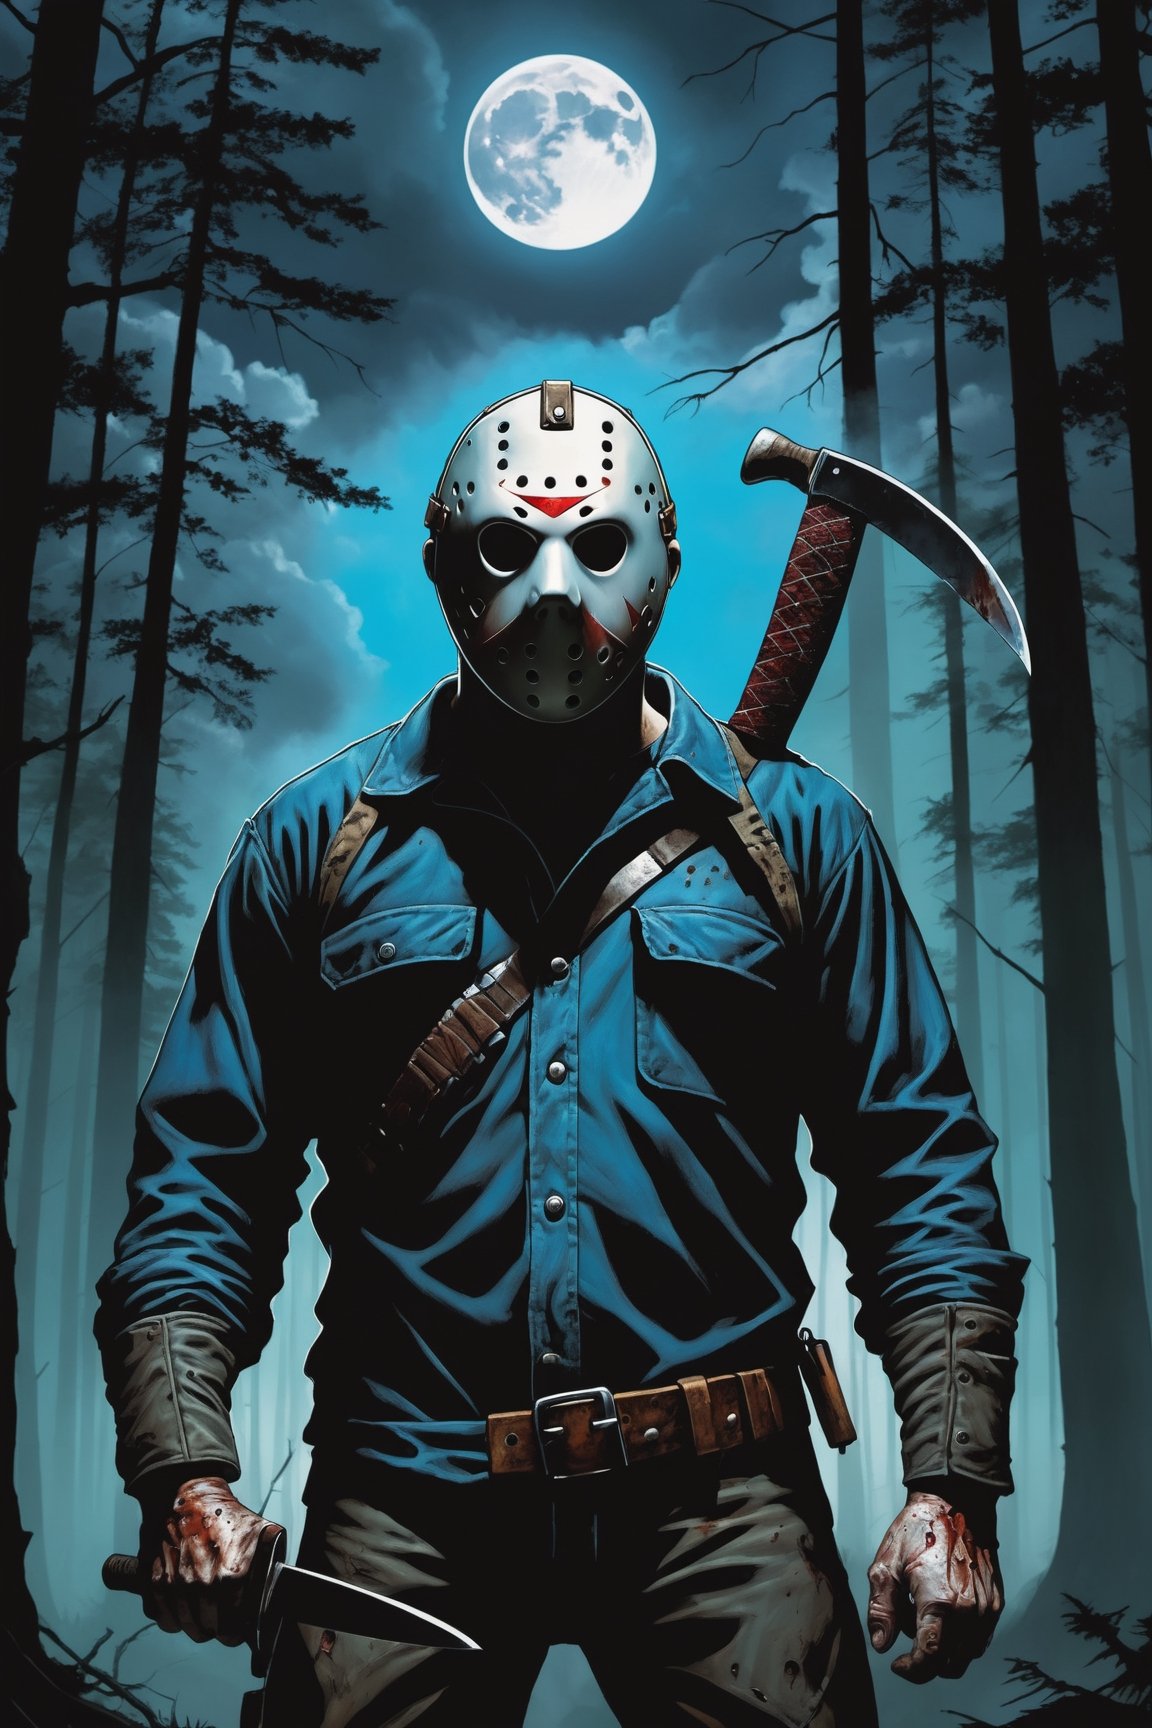 Jason Voorhees, facial portrait,  (holding machete), inside forest, cloudy sky, lightning, full moon, from behind, cabin in the woods